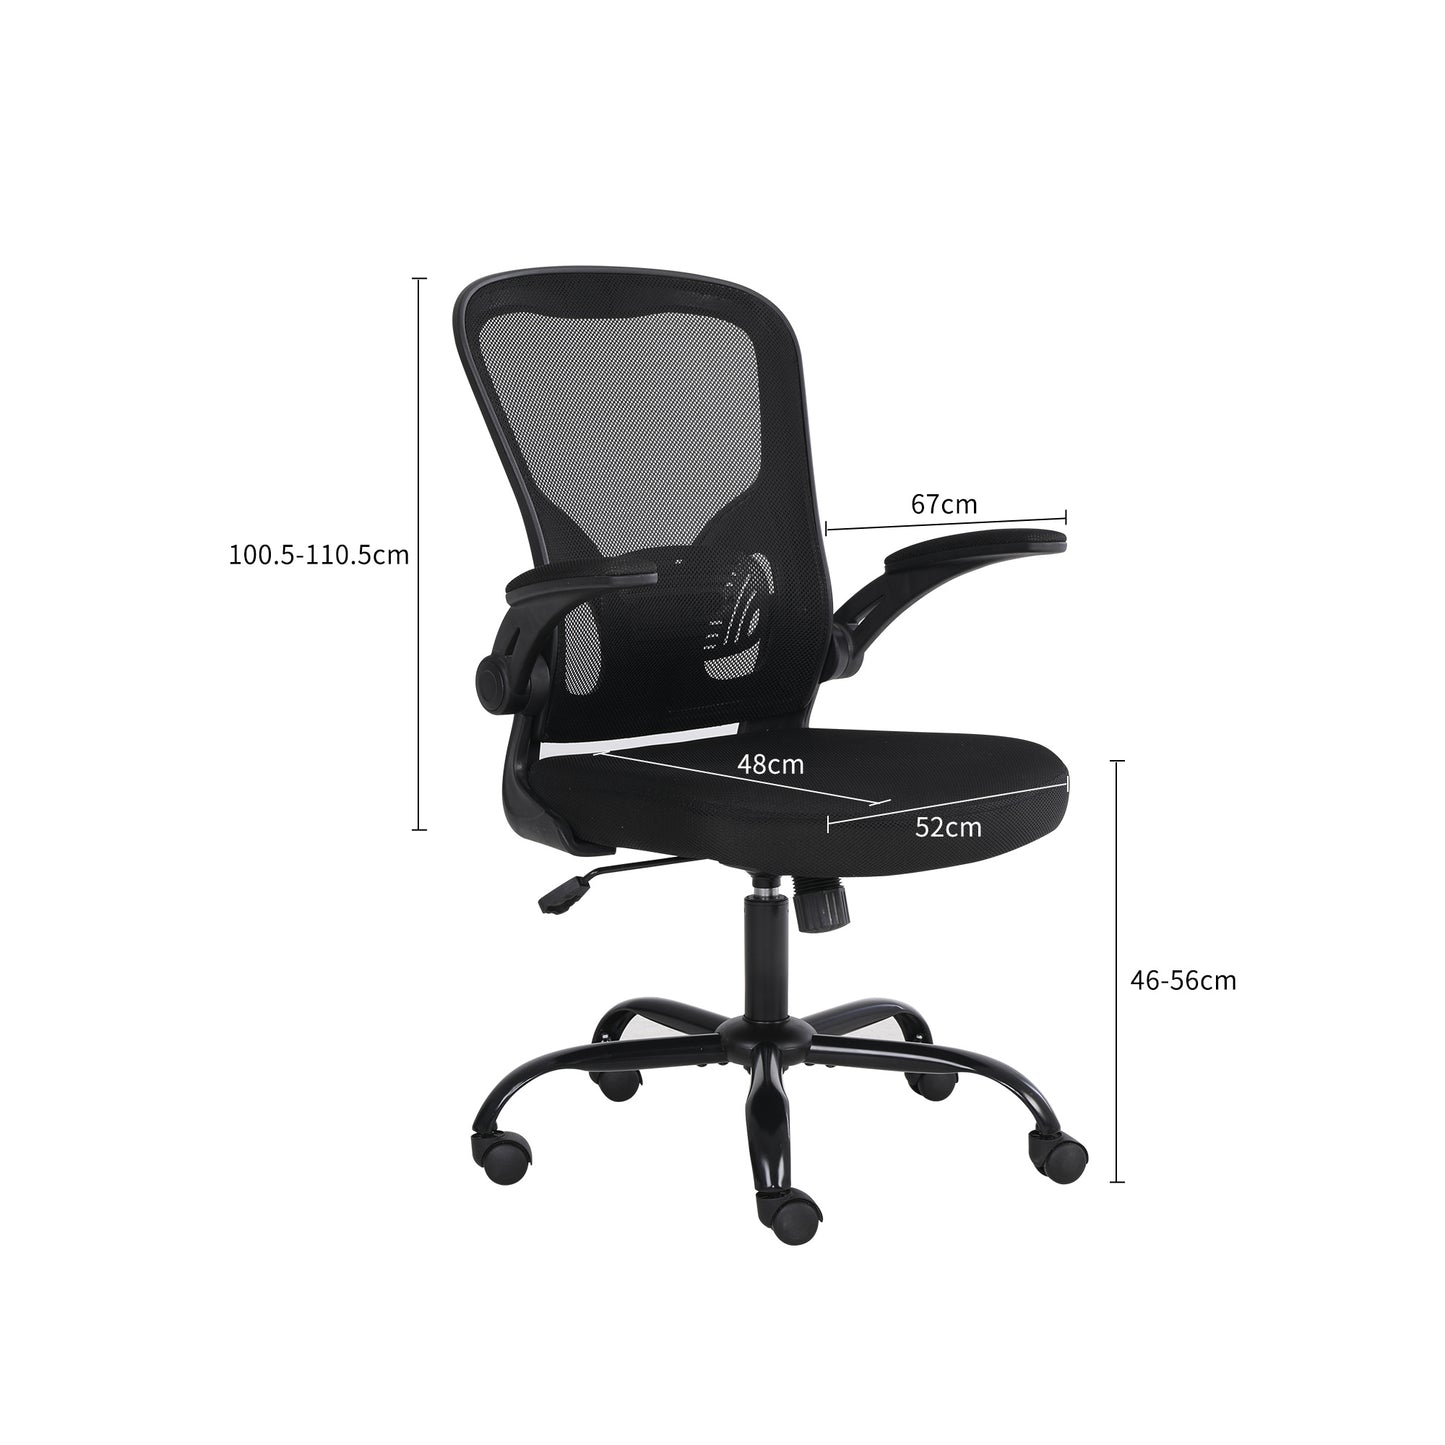 Computer Chair Swivel Rolling Executive Work Chair with Lumbar Support Arm, Home Office Chair Ergonomic Office Desk Chair Mesh, Adjustable Armrests Adult Black